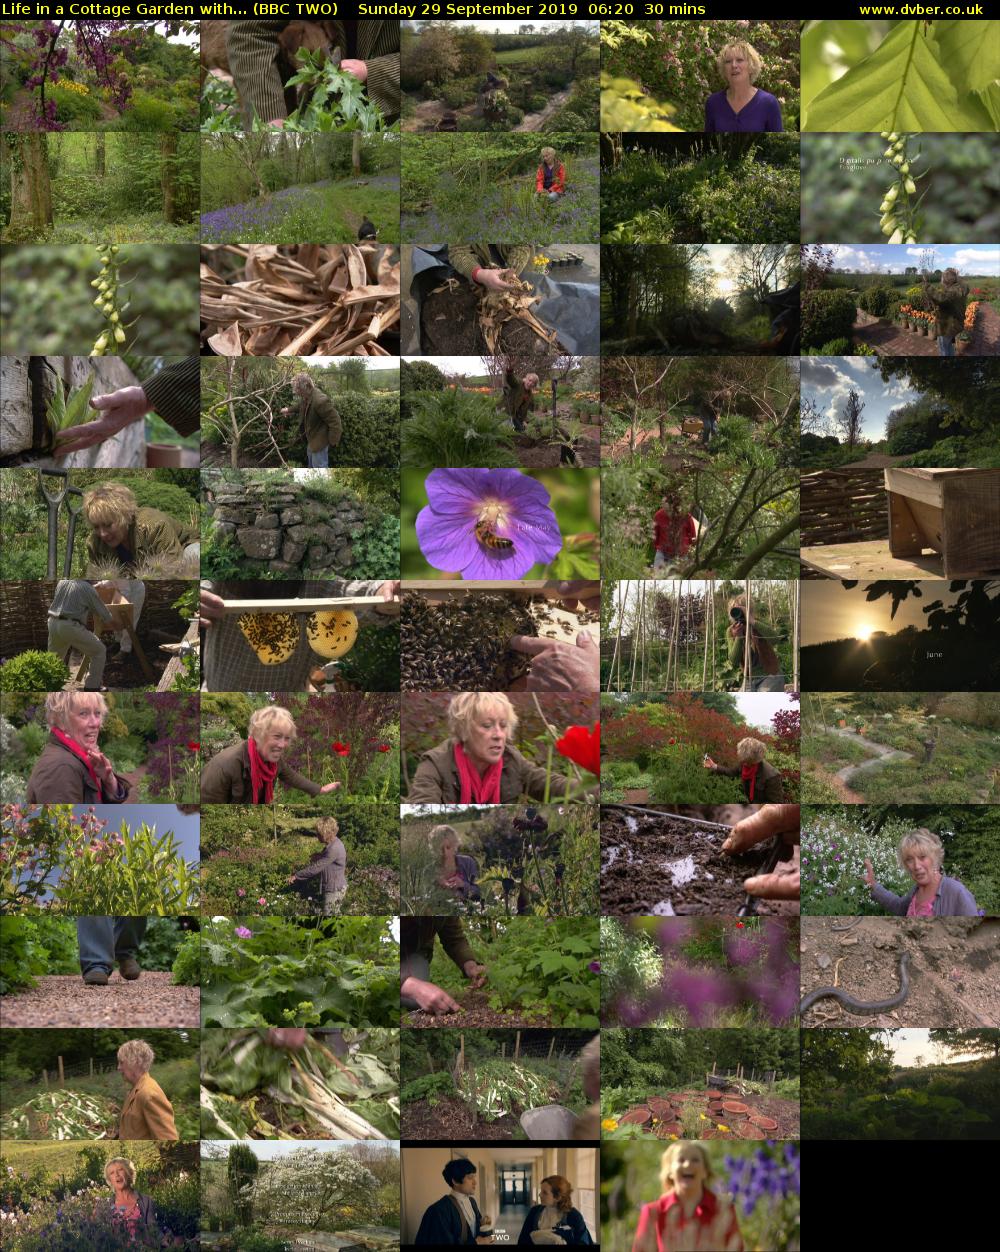 Life in a Cottage Garden with... (BBC TWO) Sunday 29 September 2019 06:20 - 06:50